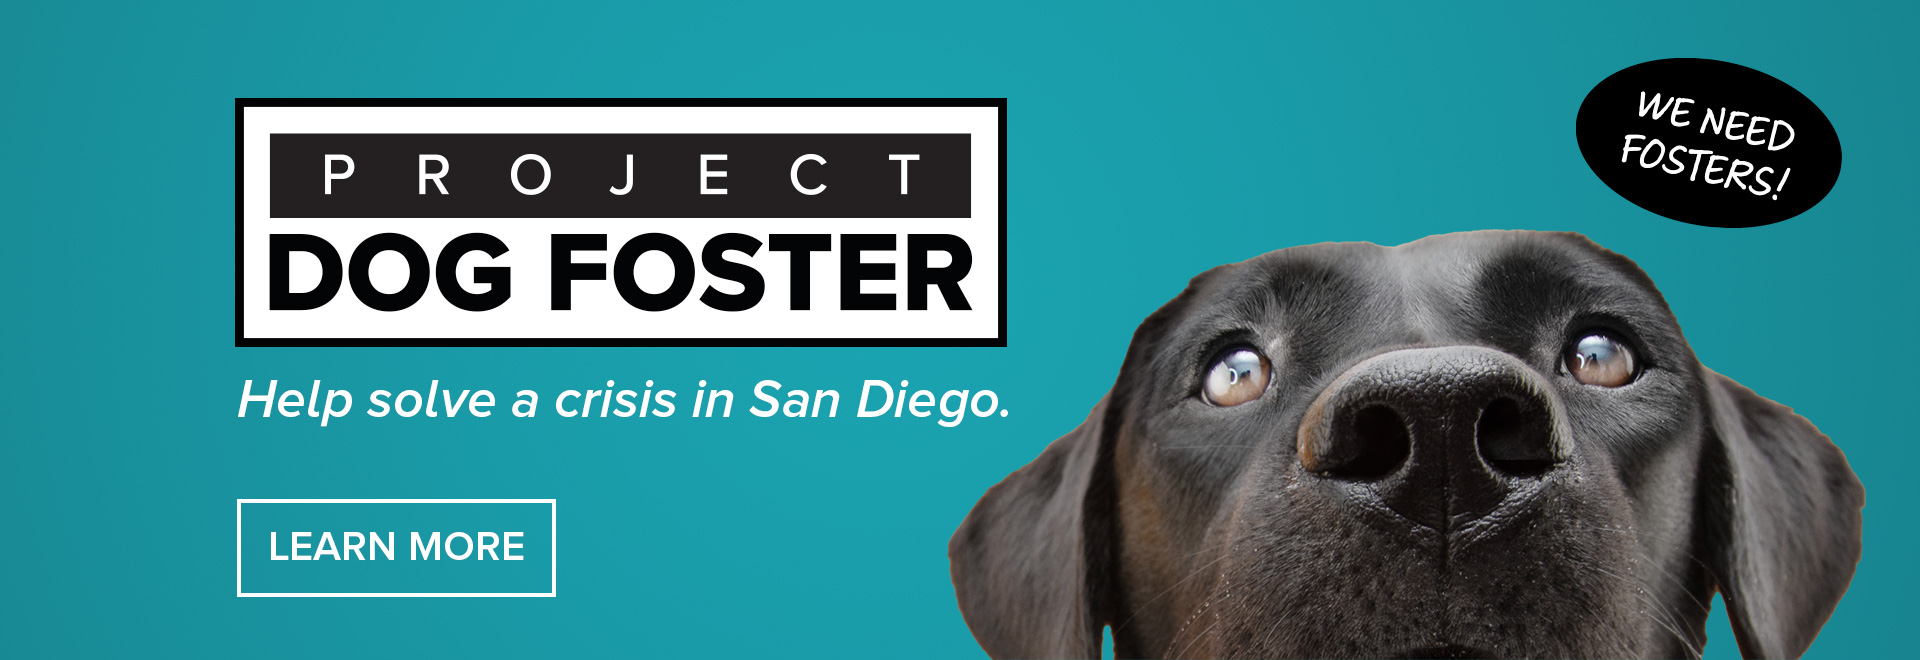 Project Dog Foster, help solve a crisis in San Diego | Learn More